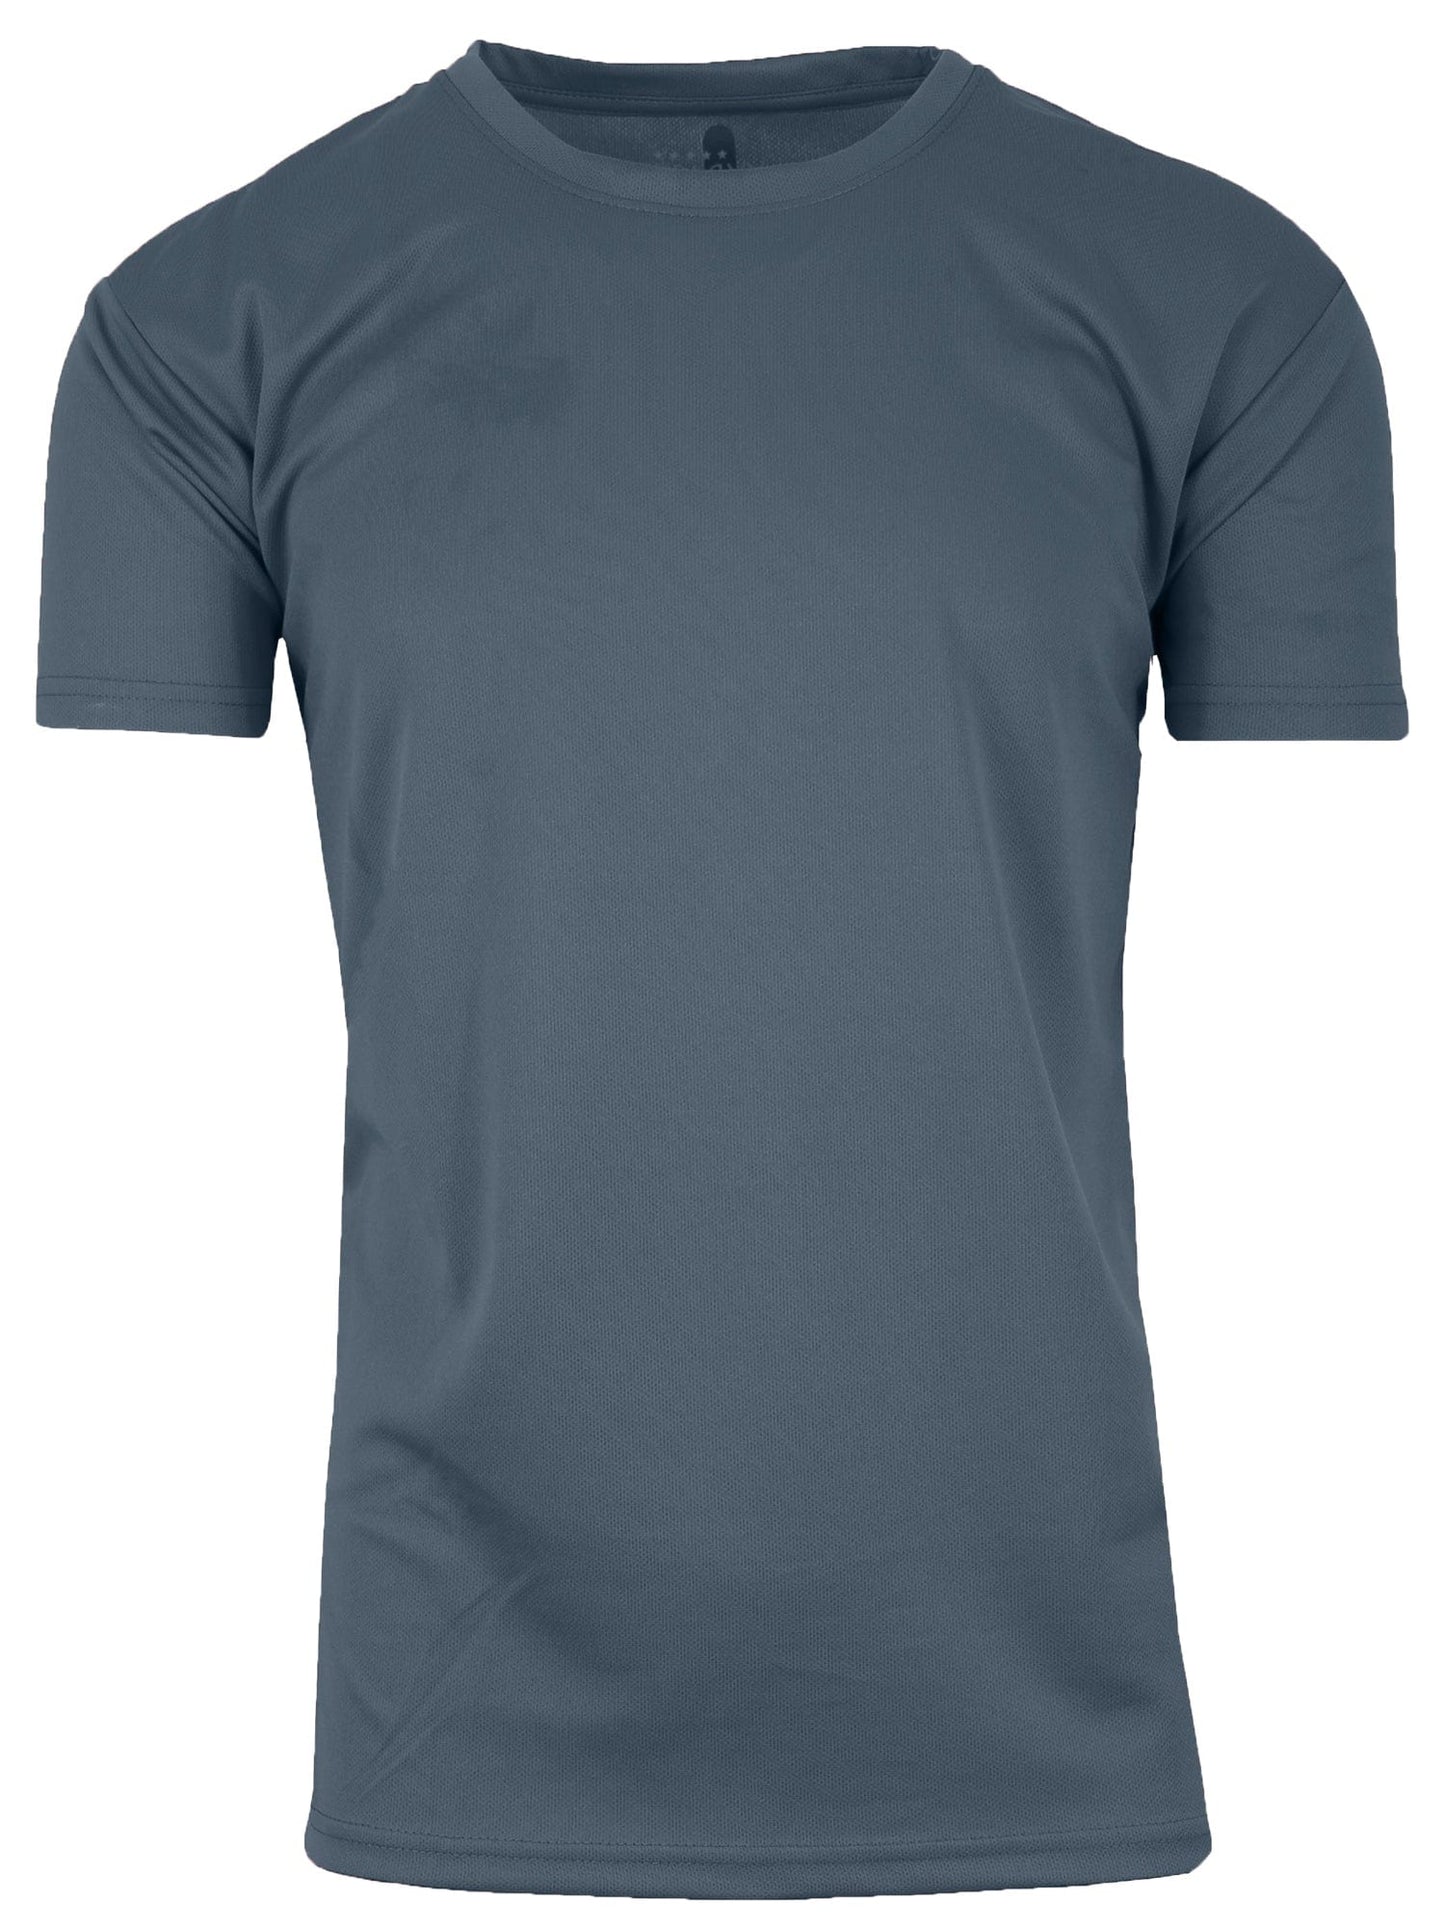 Men's Performance Moisture Wicking Active Short Sleeve & Muscle Tee - GalaxybyHarvic